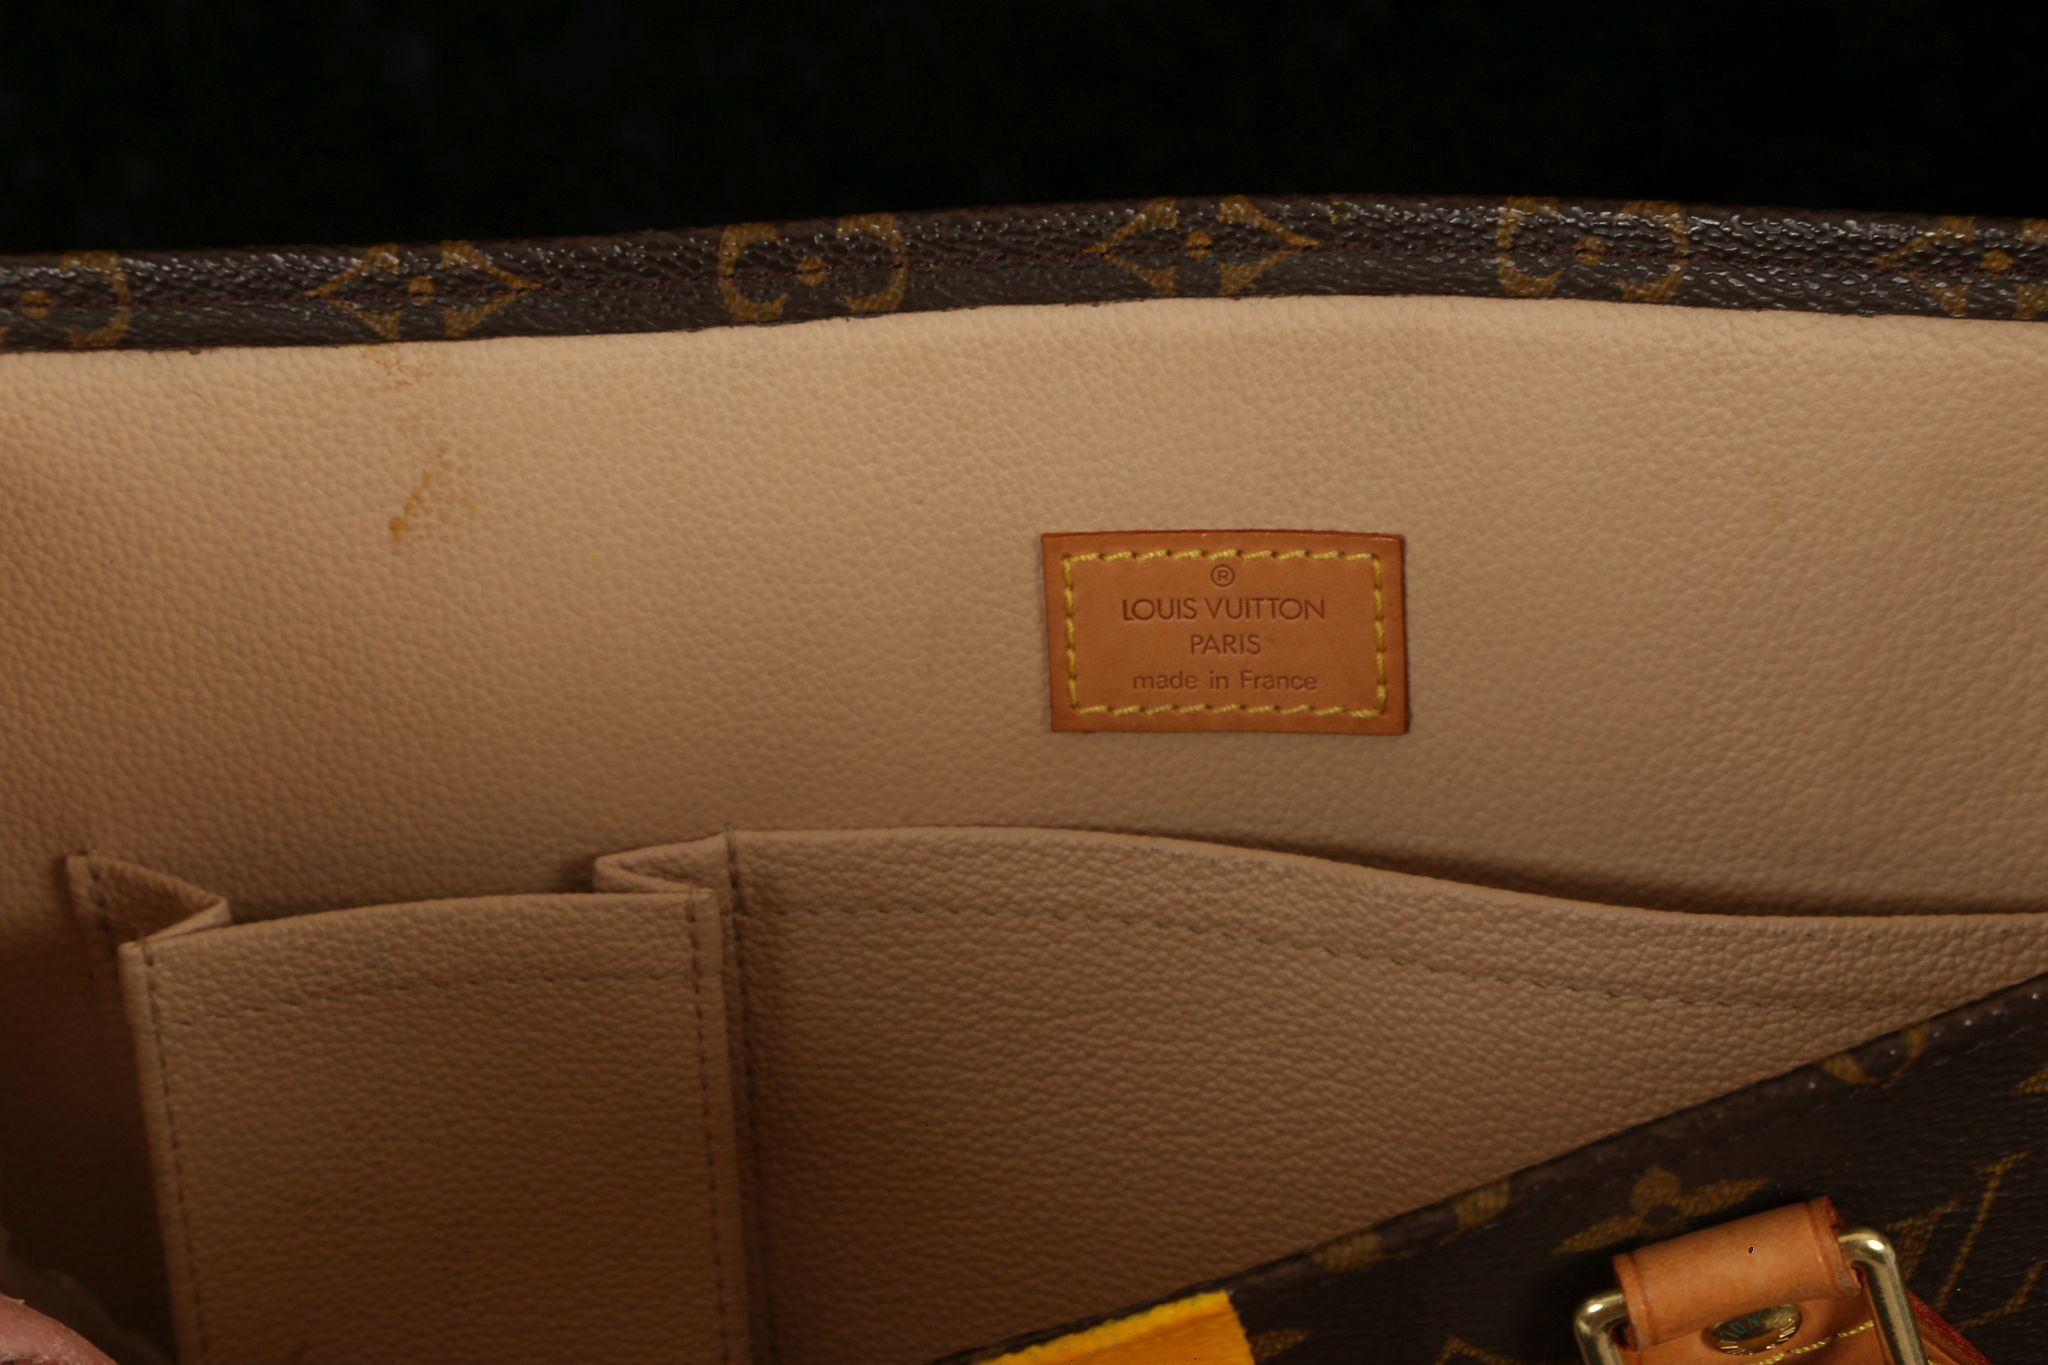 LOUIS VUITTON PLAT HANDBAG, date code for 2004, monogram canvas with leather trim and painted red - Image 14 of 16